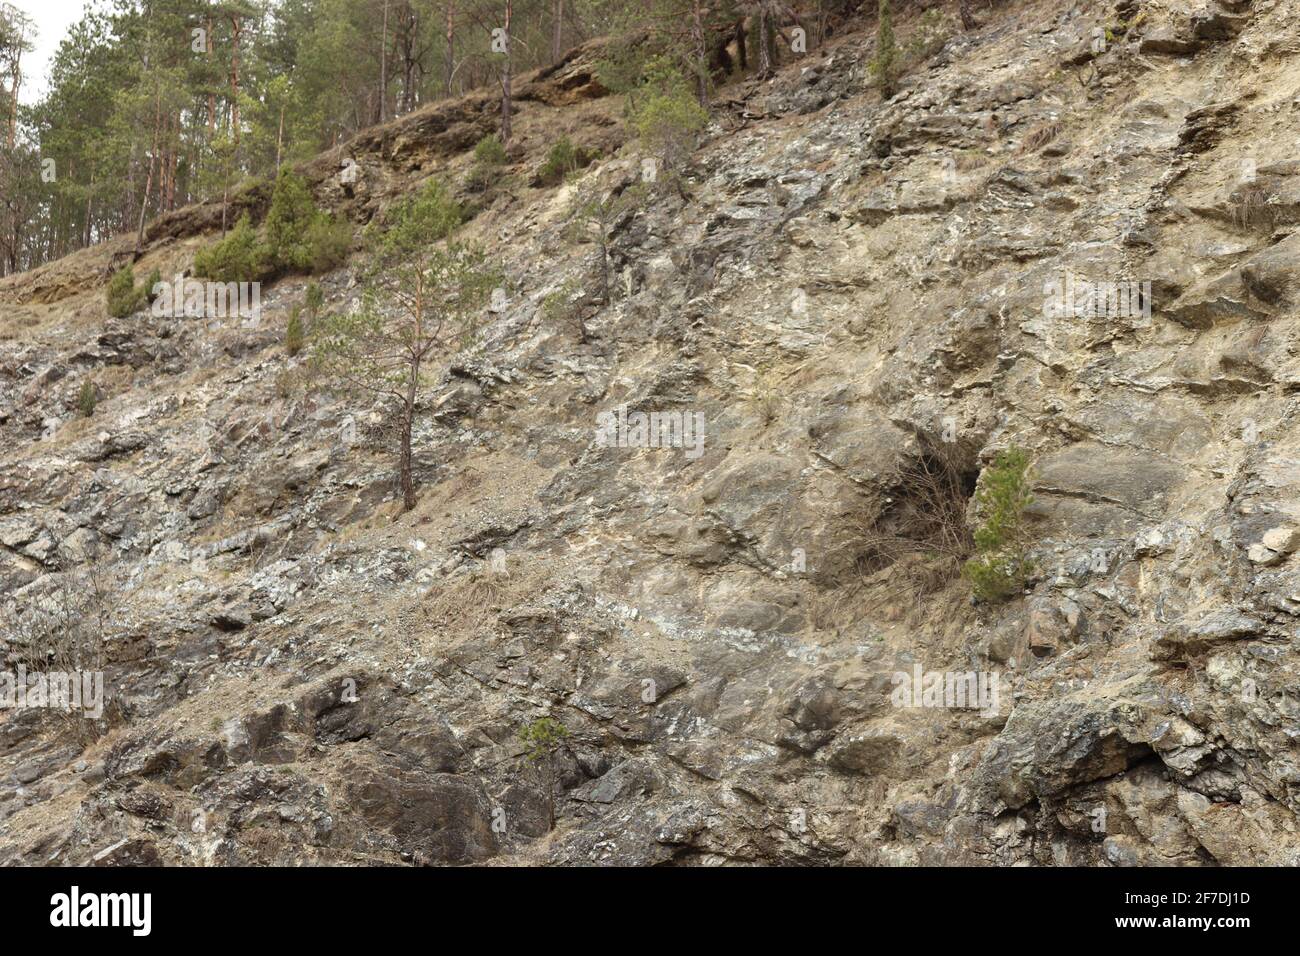 Part of Steep mountainside with open talus slopes Stock Photo